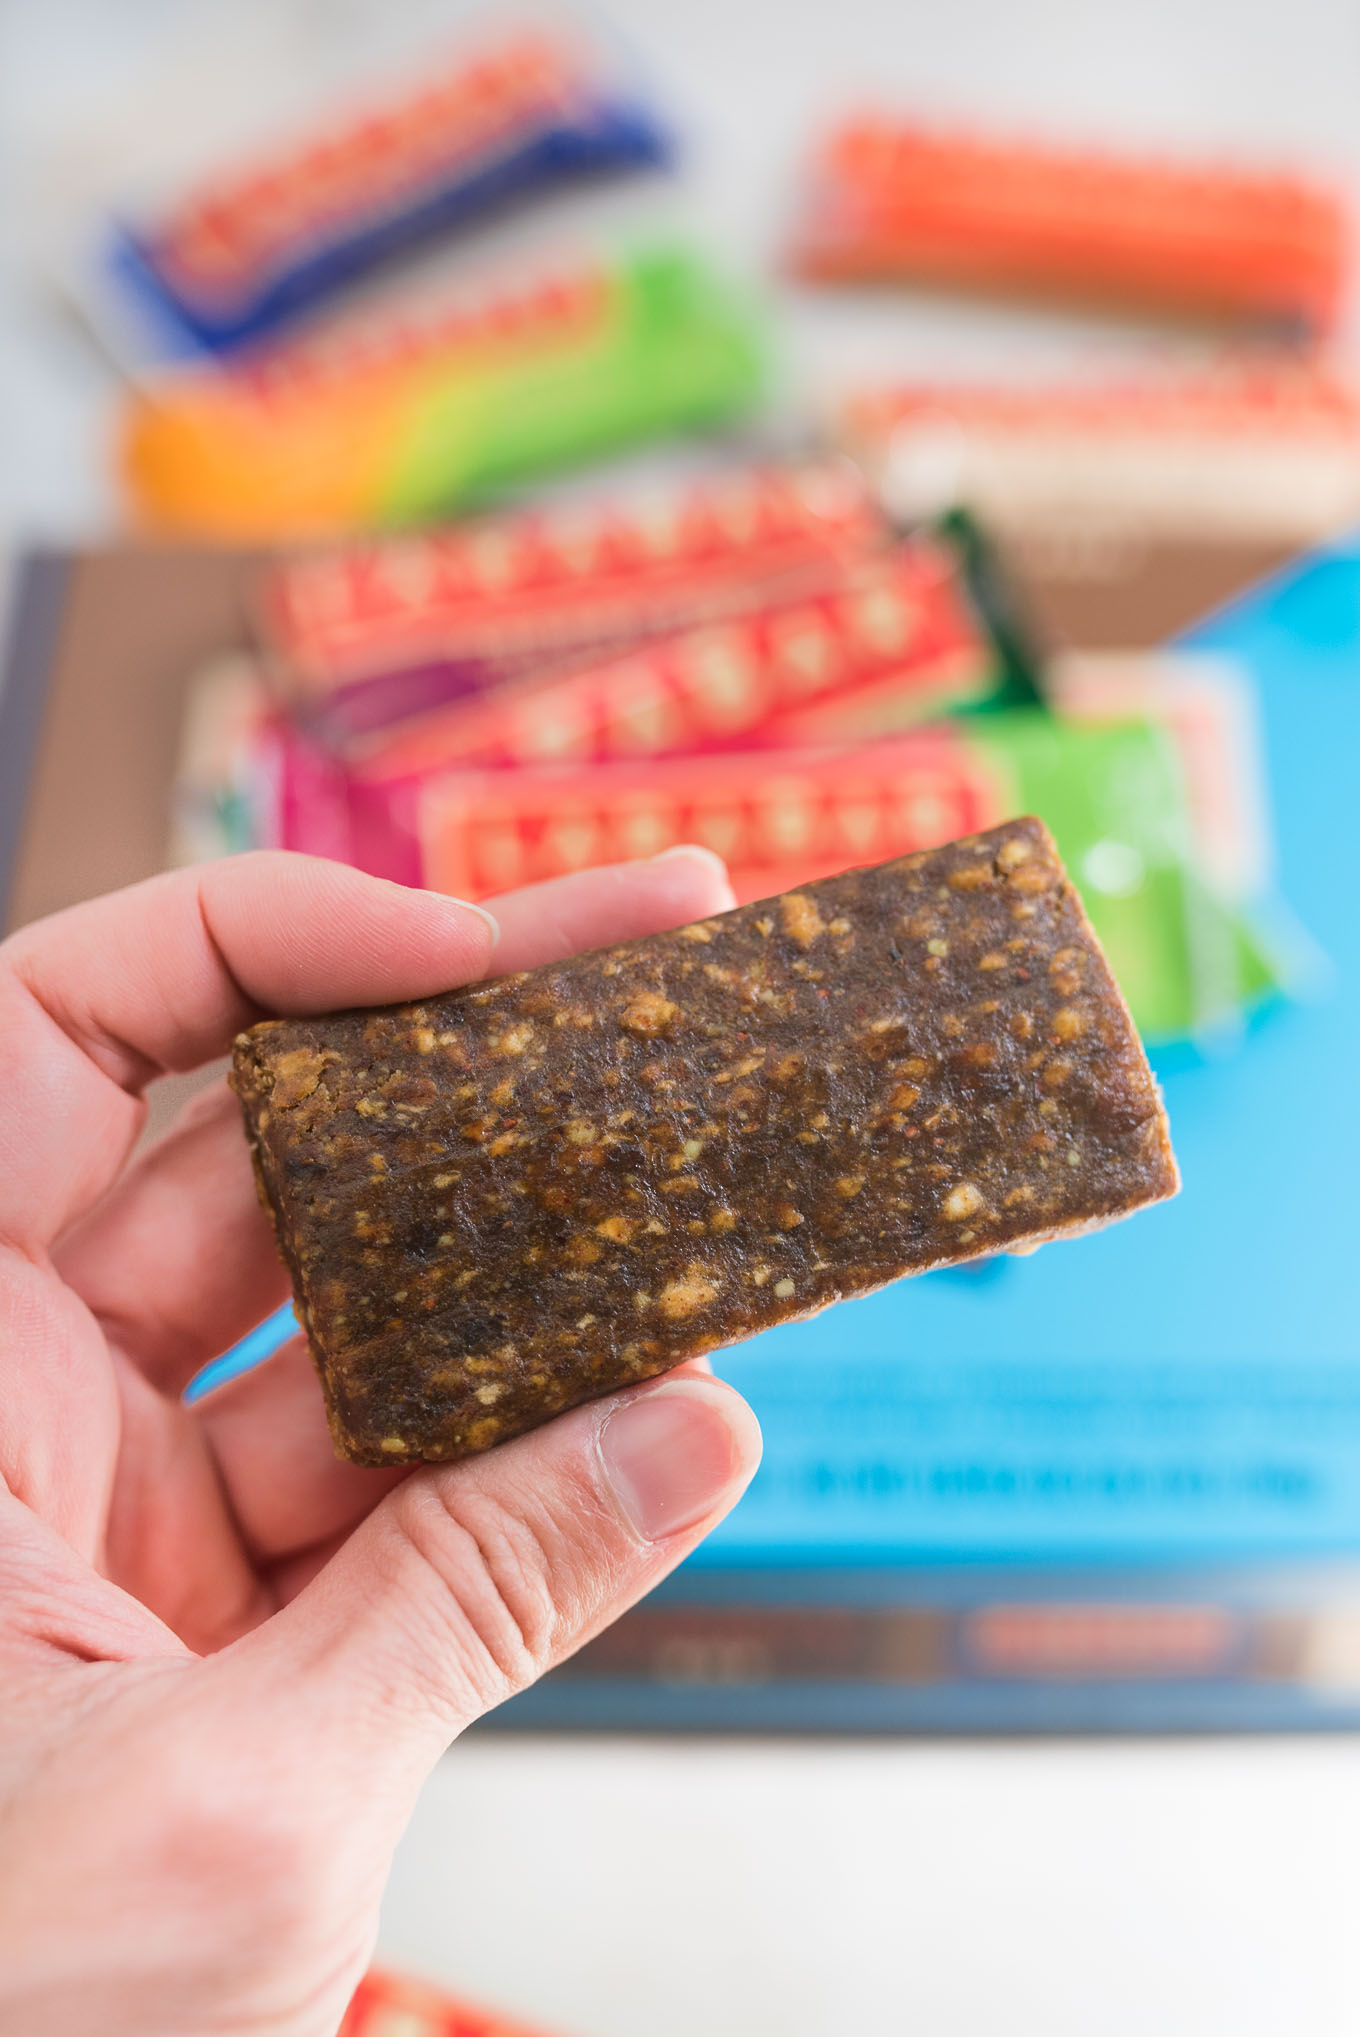 The perfect fruit and nut bar to stock up on- #glutenfree #paleo and #whole30 compliant. Real food in a snack bar form! 25% off through Feb. 14th! #sponsored